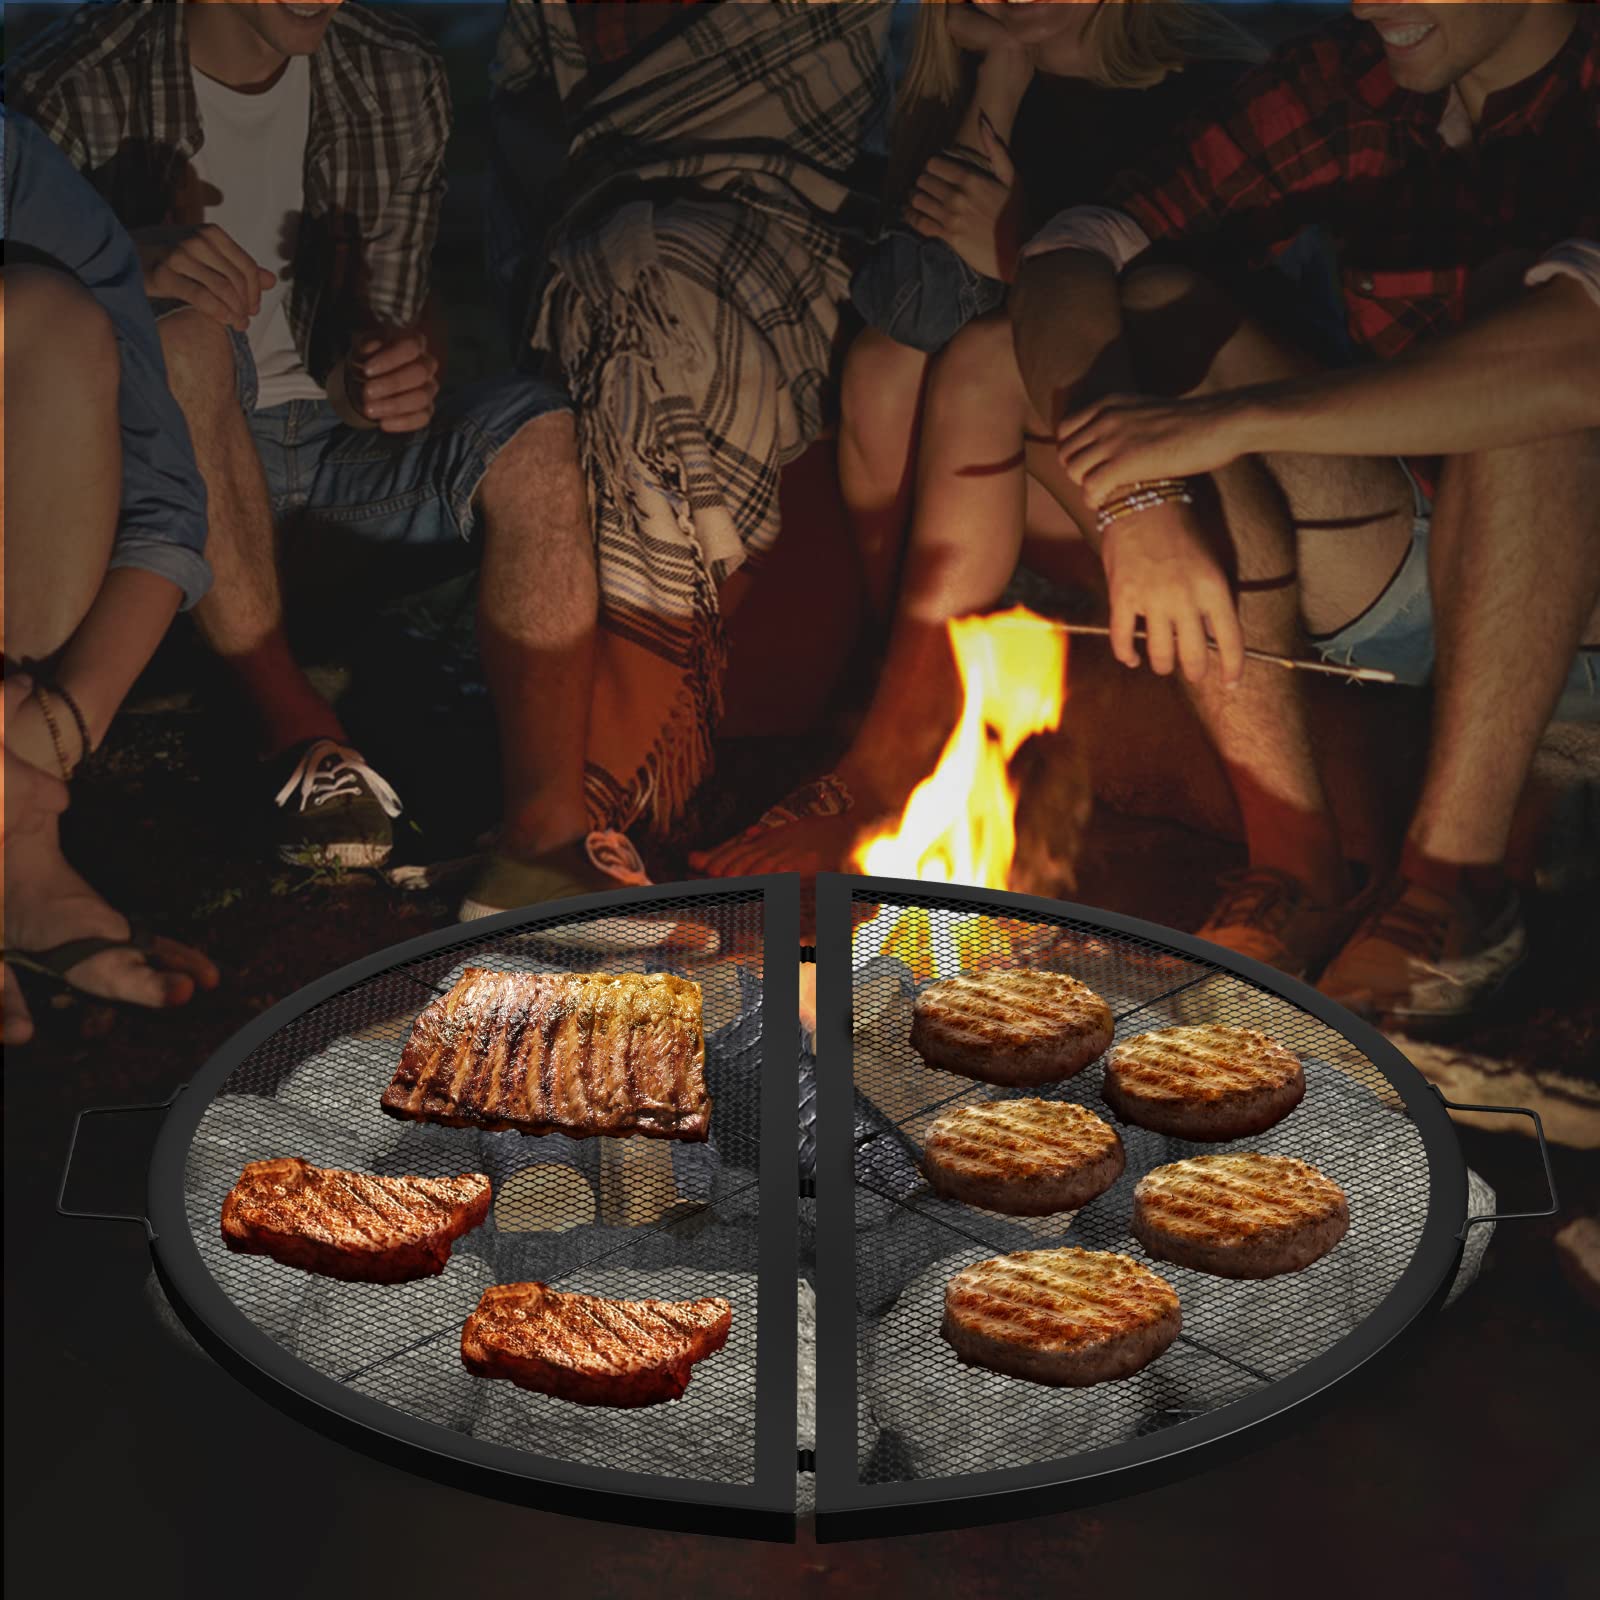 VEVOR Foldable Fire Pit Grate Round Heavy Duty X-Marks BBQ Grill with Portable Handle & Support Wire for Outdoor Campfire Party & Gathering, 30 Inch Black